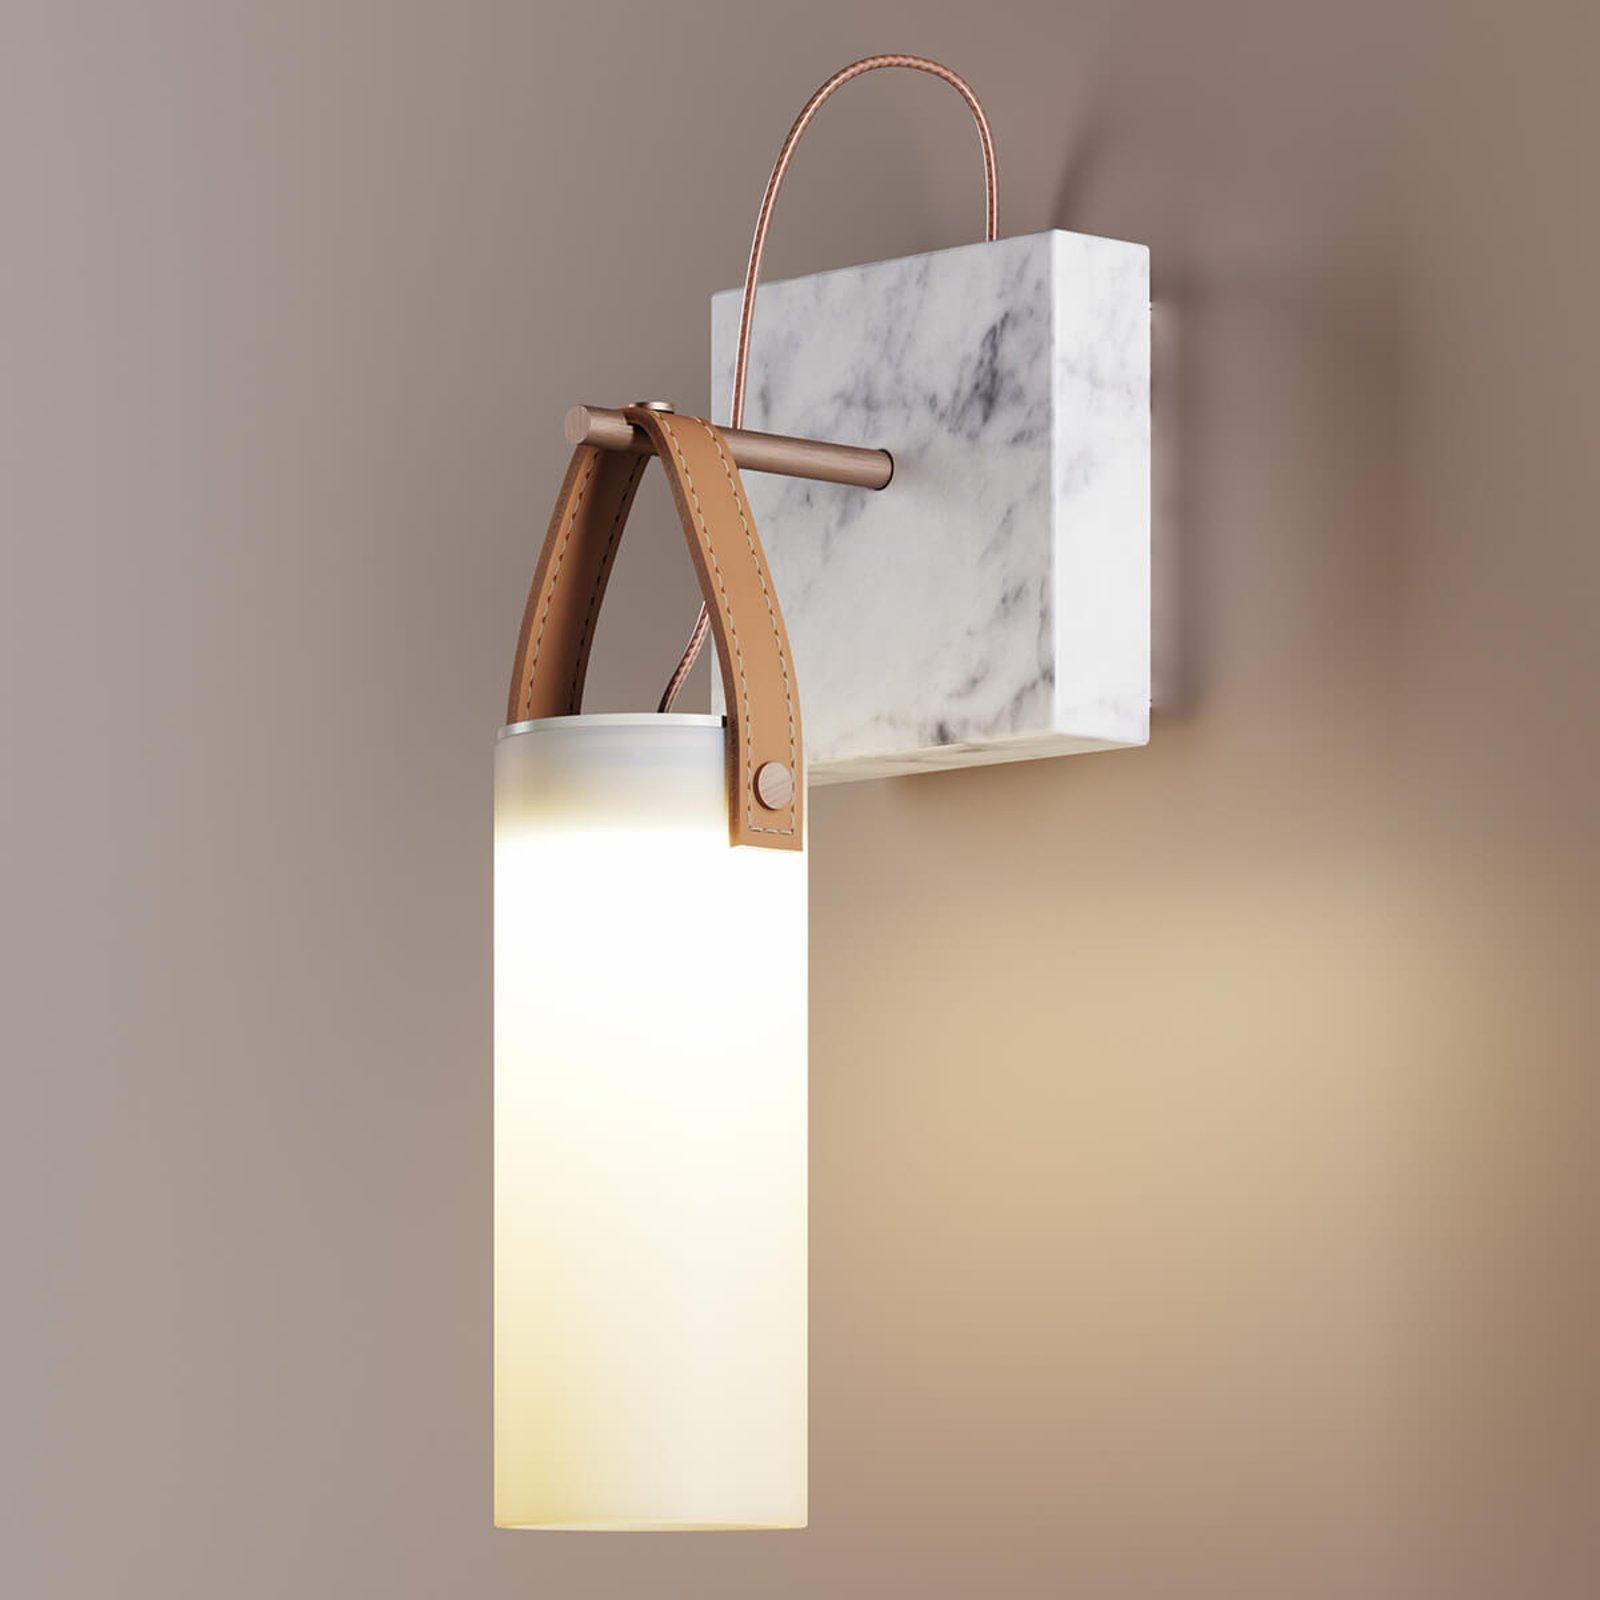 Designer wall light Galerie with LED